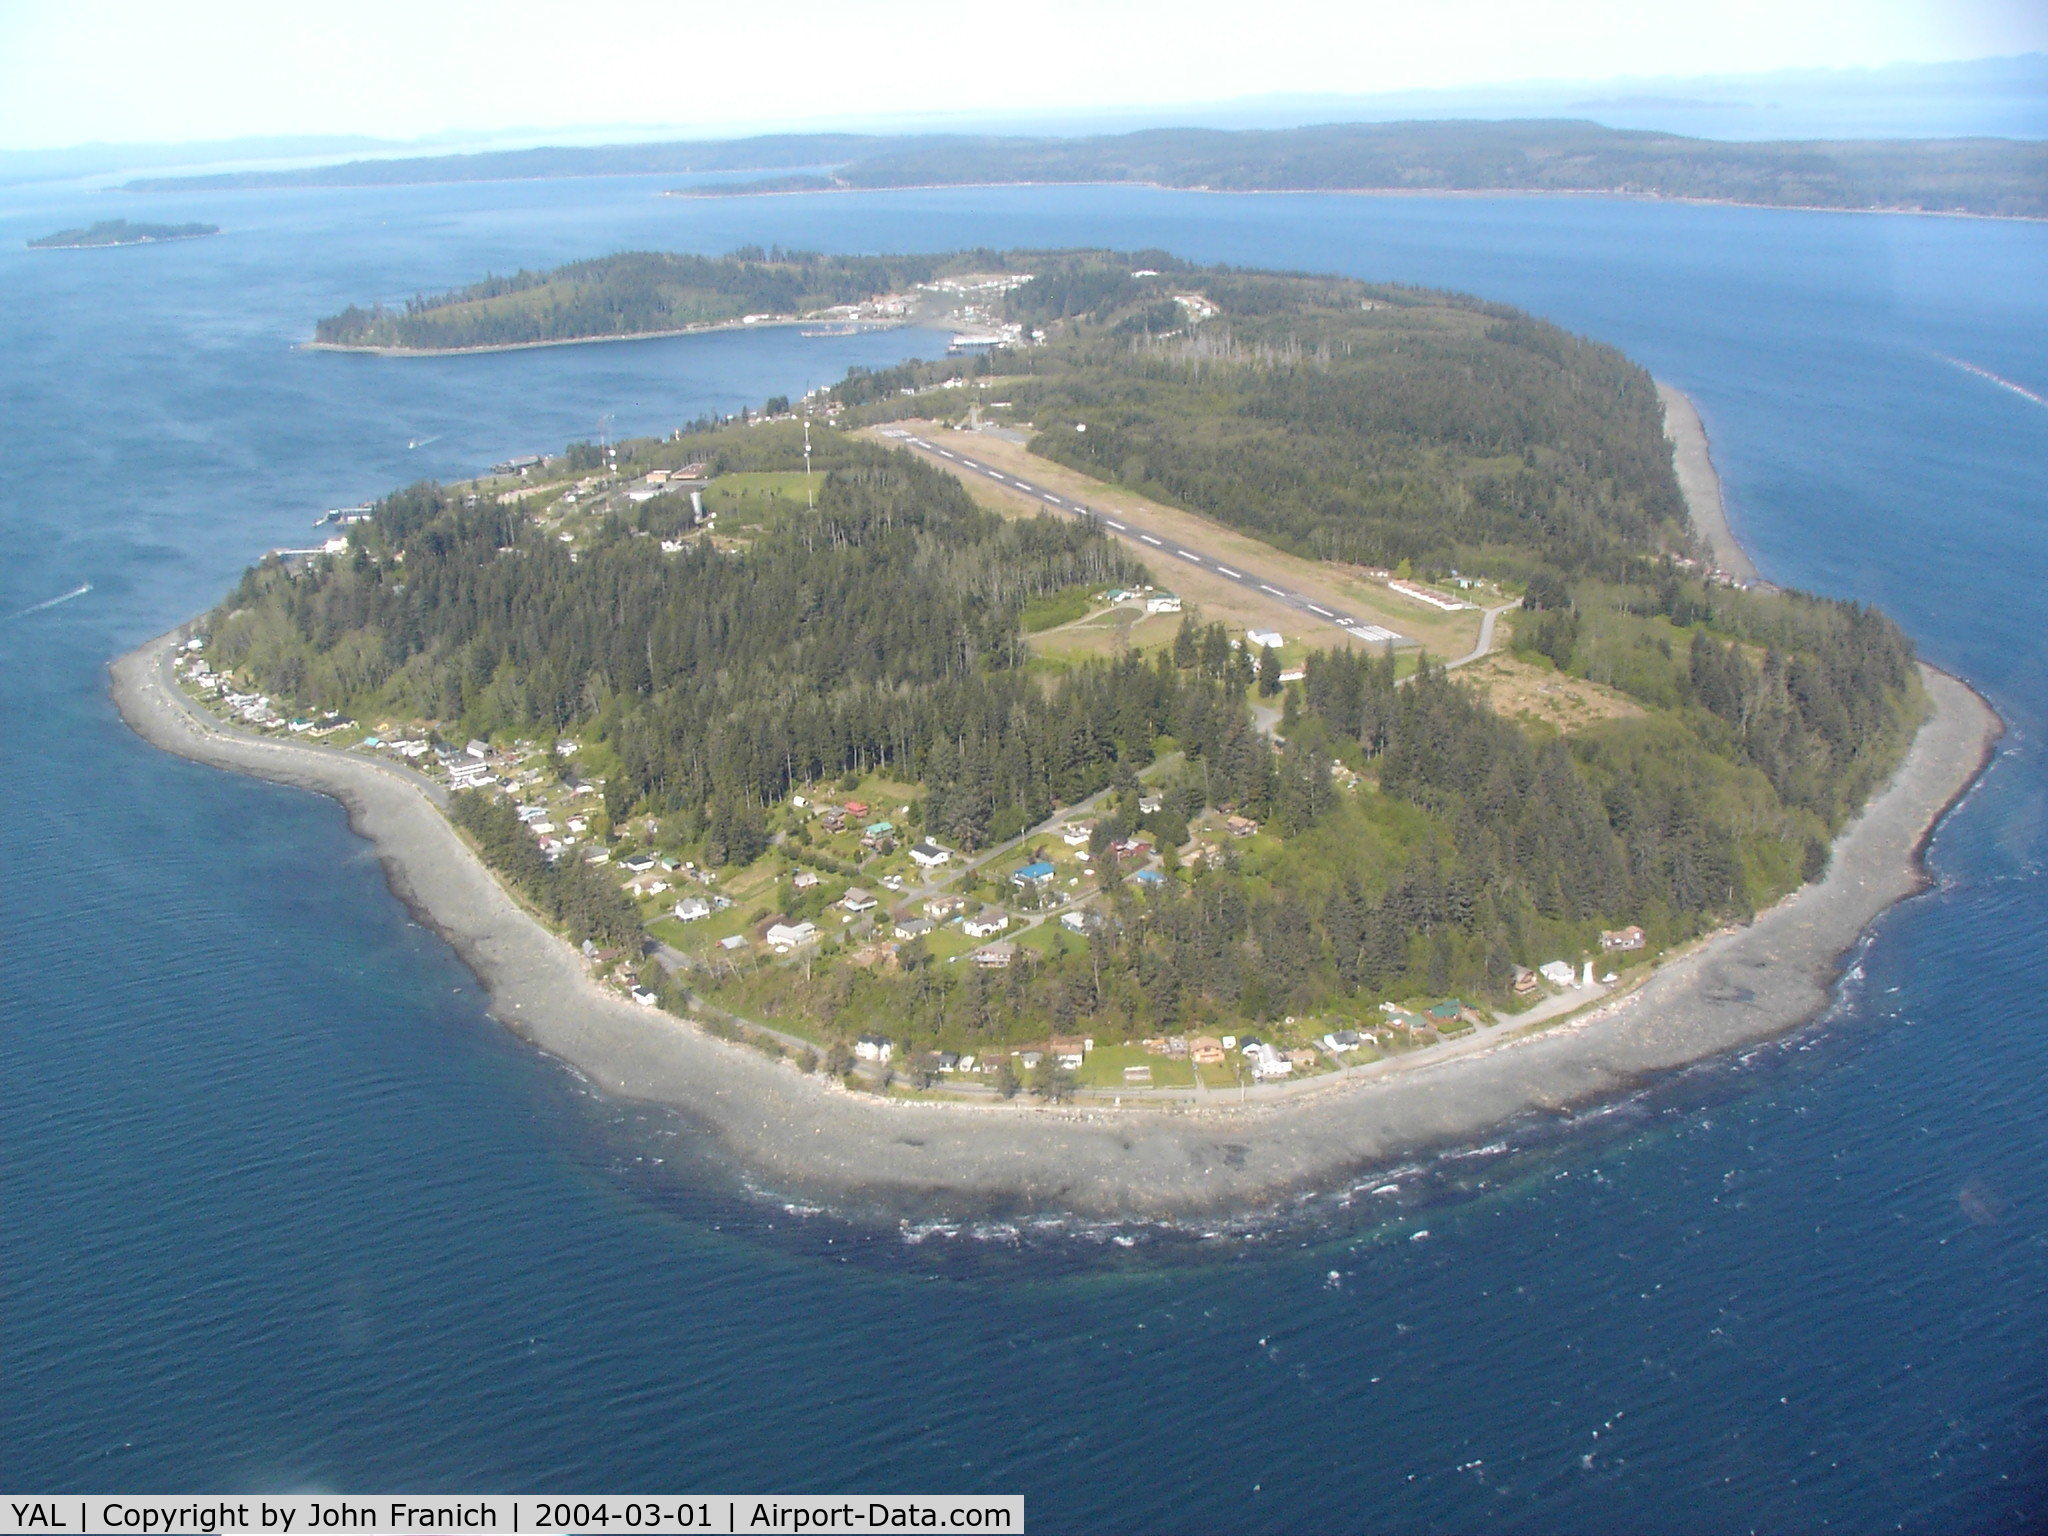 Alert Bay Airport, Alert Bay, British Columbia Canada (YAL) - You All Not Cleared to Land